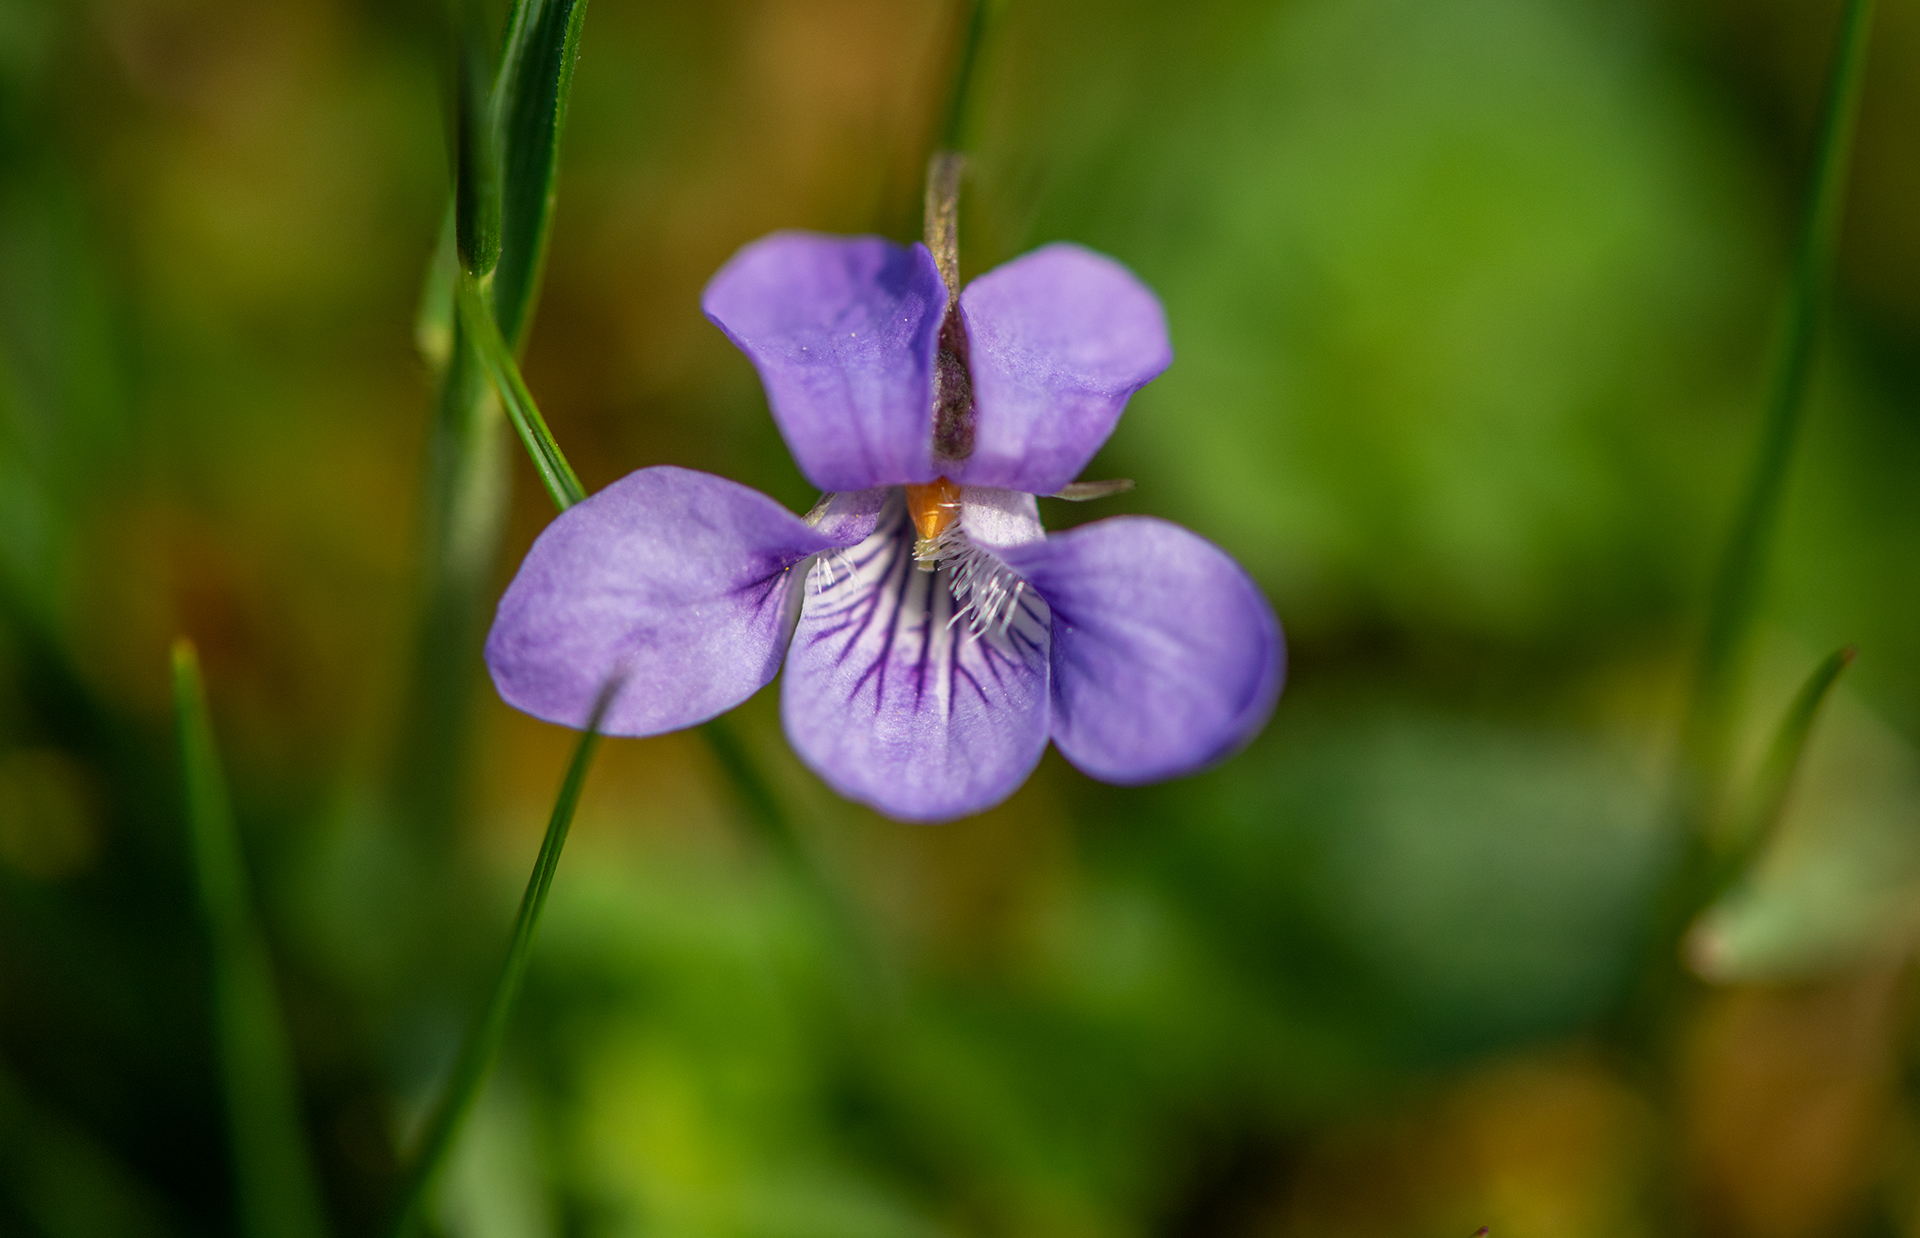 A detailed close up of a Teesdale violet (Viola rupestris rosea) in the Wild Ingleborough project site.
Ingleborough, Yorkshire Dales, UK